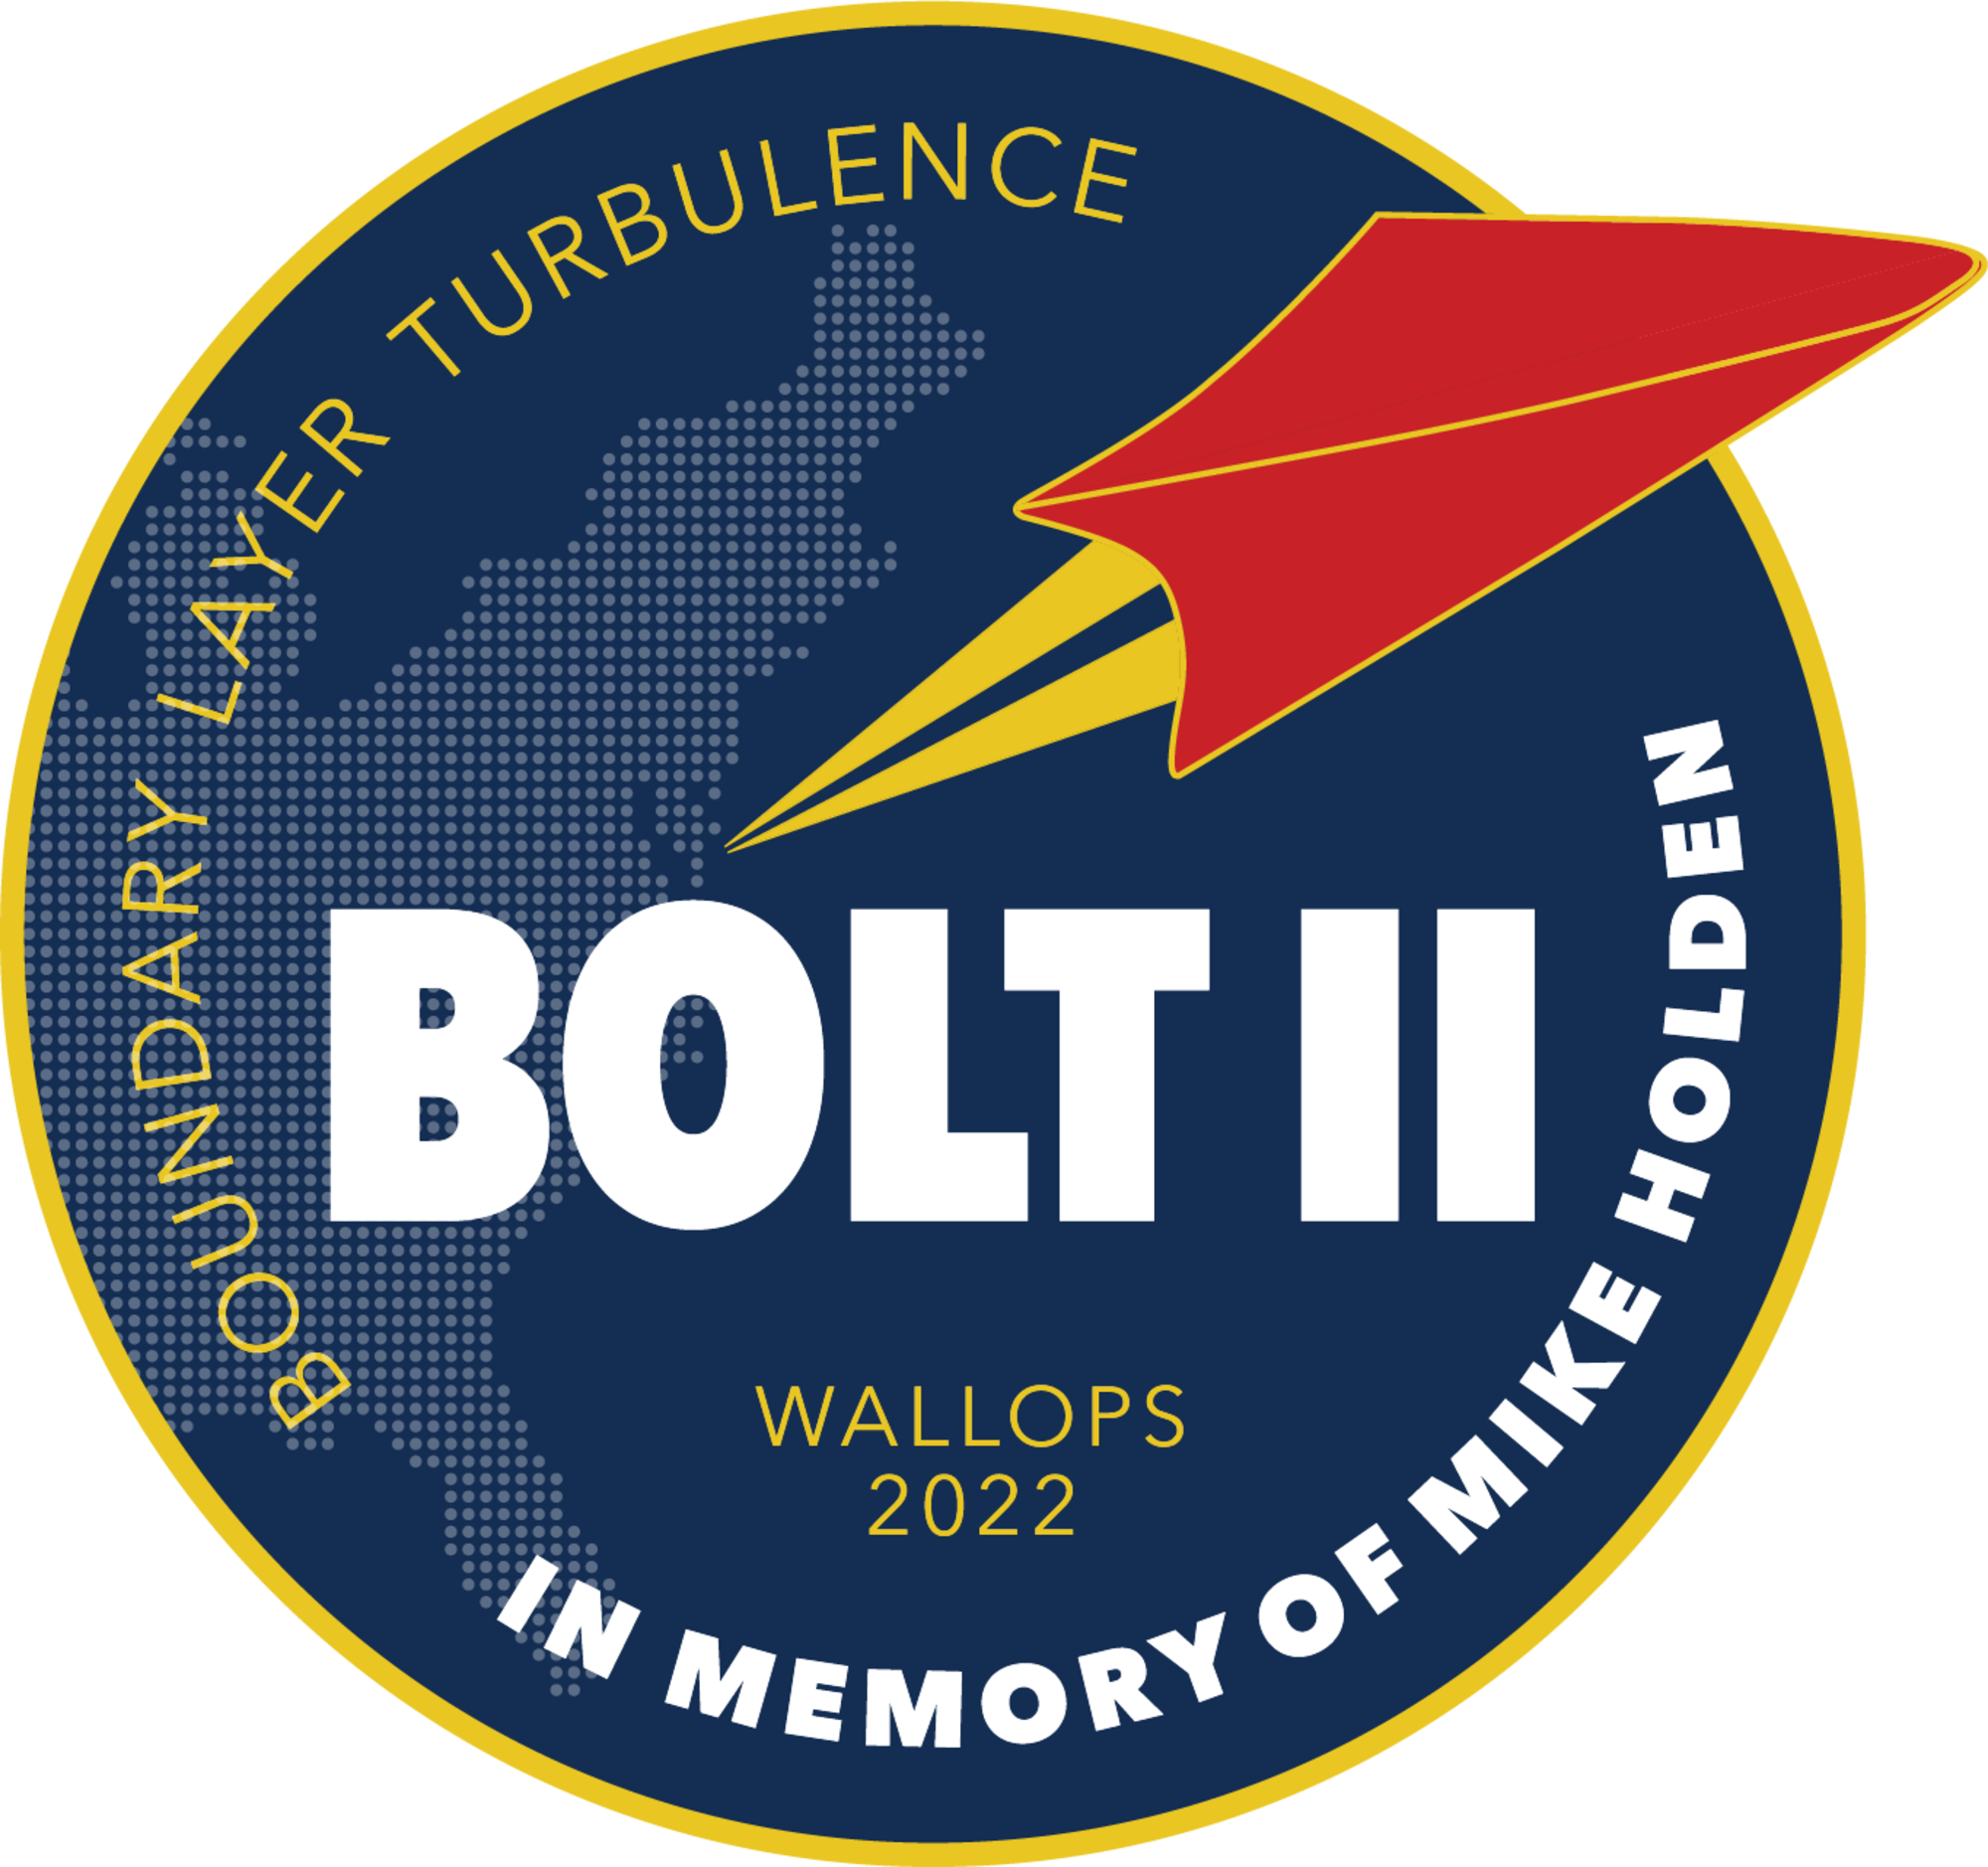 The goals of the AFOSR BOLT flight experiments are to collect scientific data to better understand boundary layer transition (BOLT) and turbulence (BOLT II) during hypersonic flight. (Courtesy graphic)